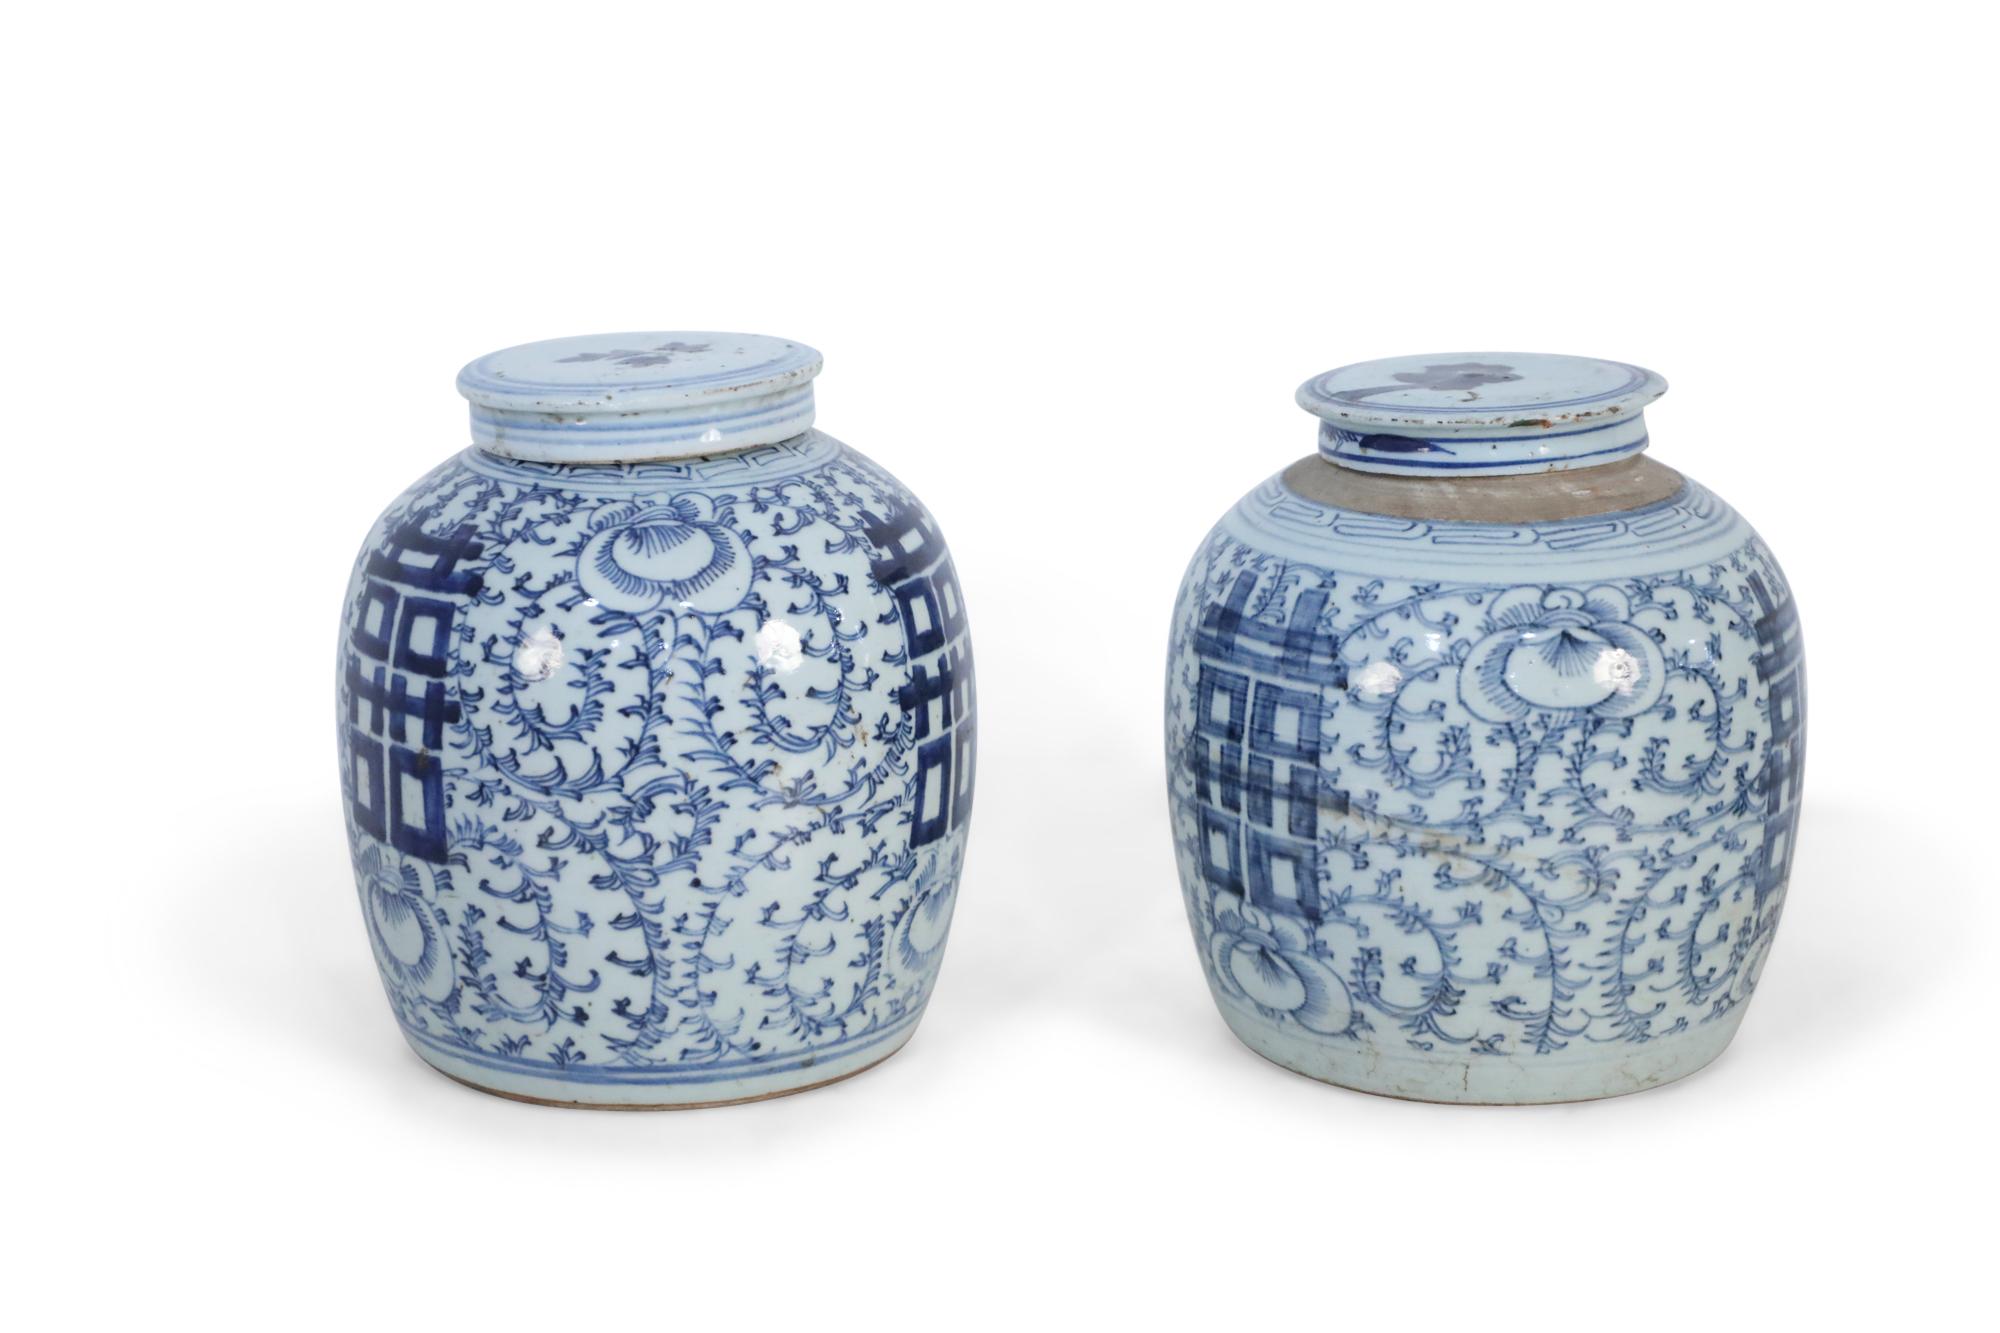 Pair of antique Chinese (late 19th century) similar ceramic ginger jars with blue floral designs surrounding bold, centered characters and geometric patterned bands leading to brown rustic stripes at the mouth openings. Each is topped with a lid